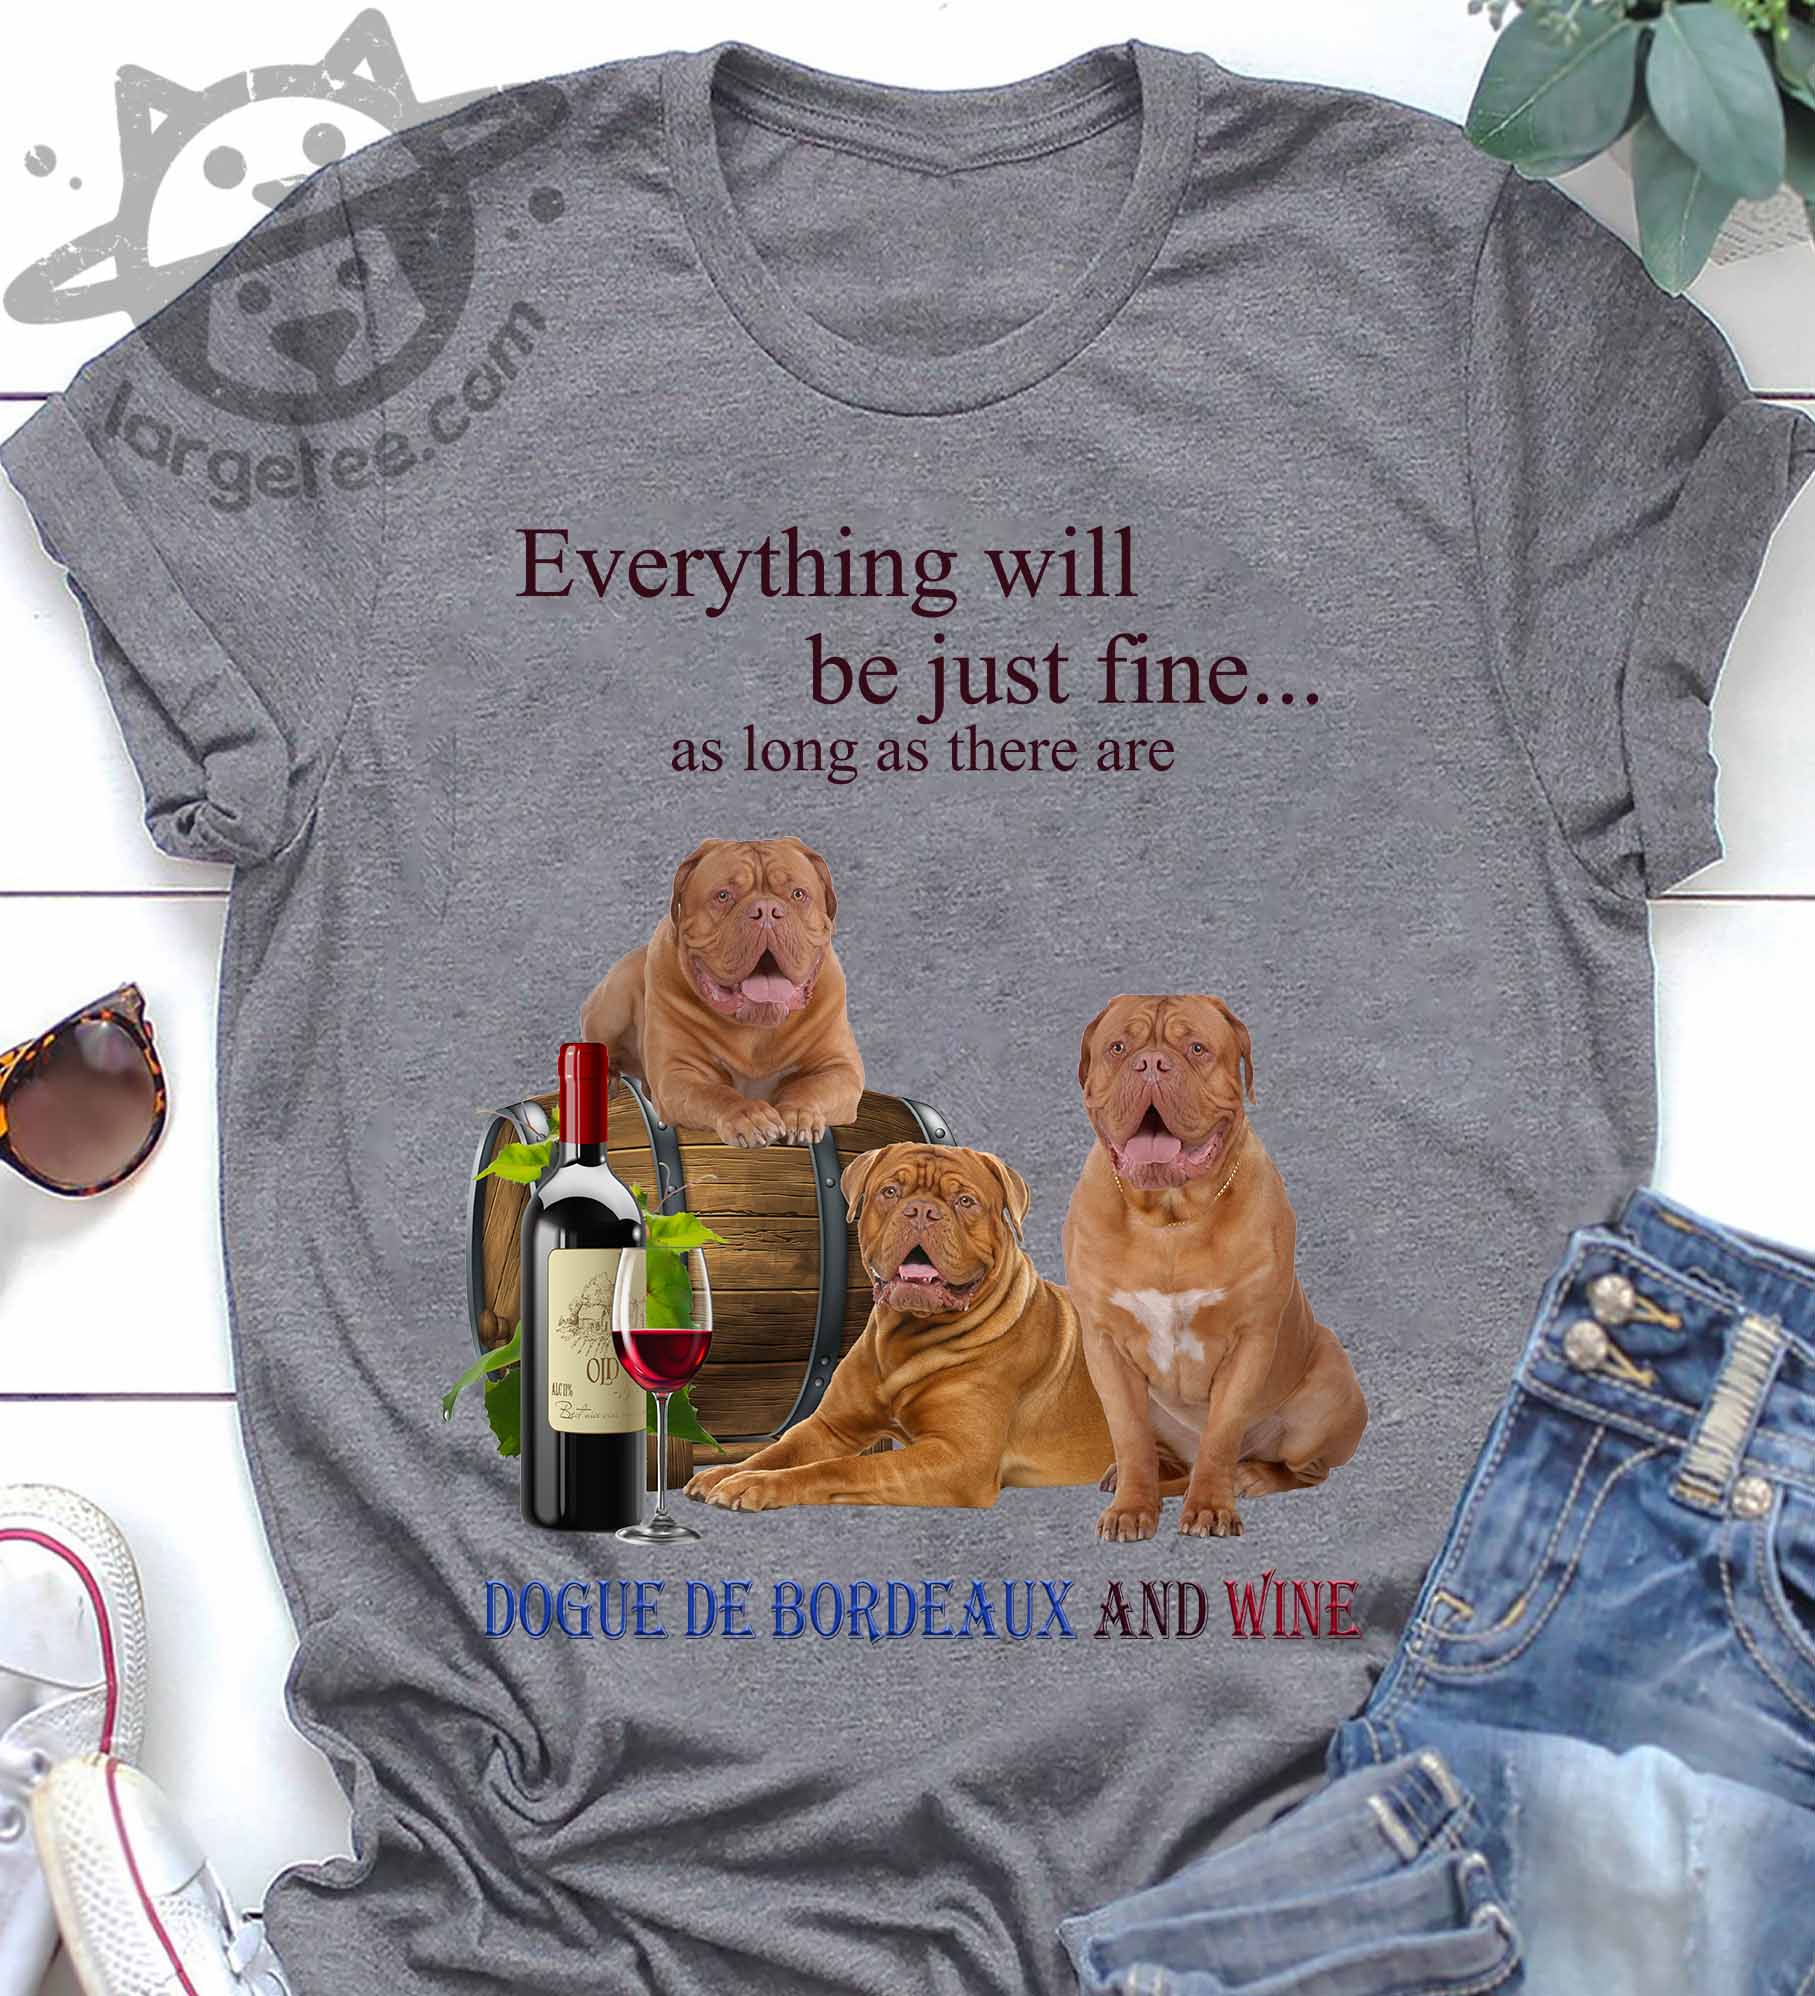 Everything will be just fine as long as there are Dogue de Bordeaux and wine